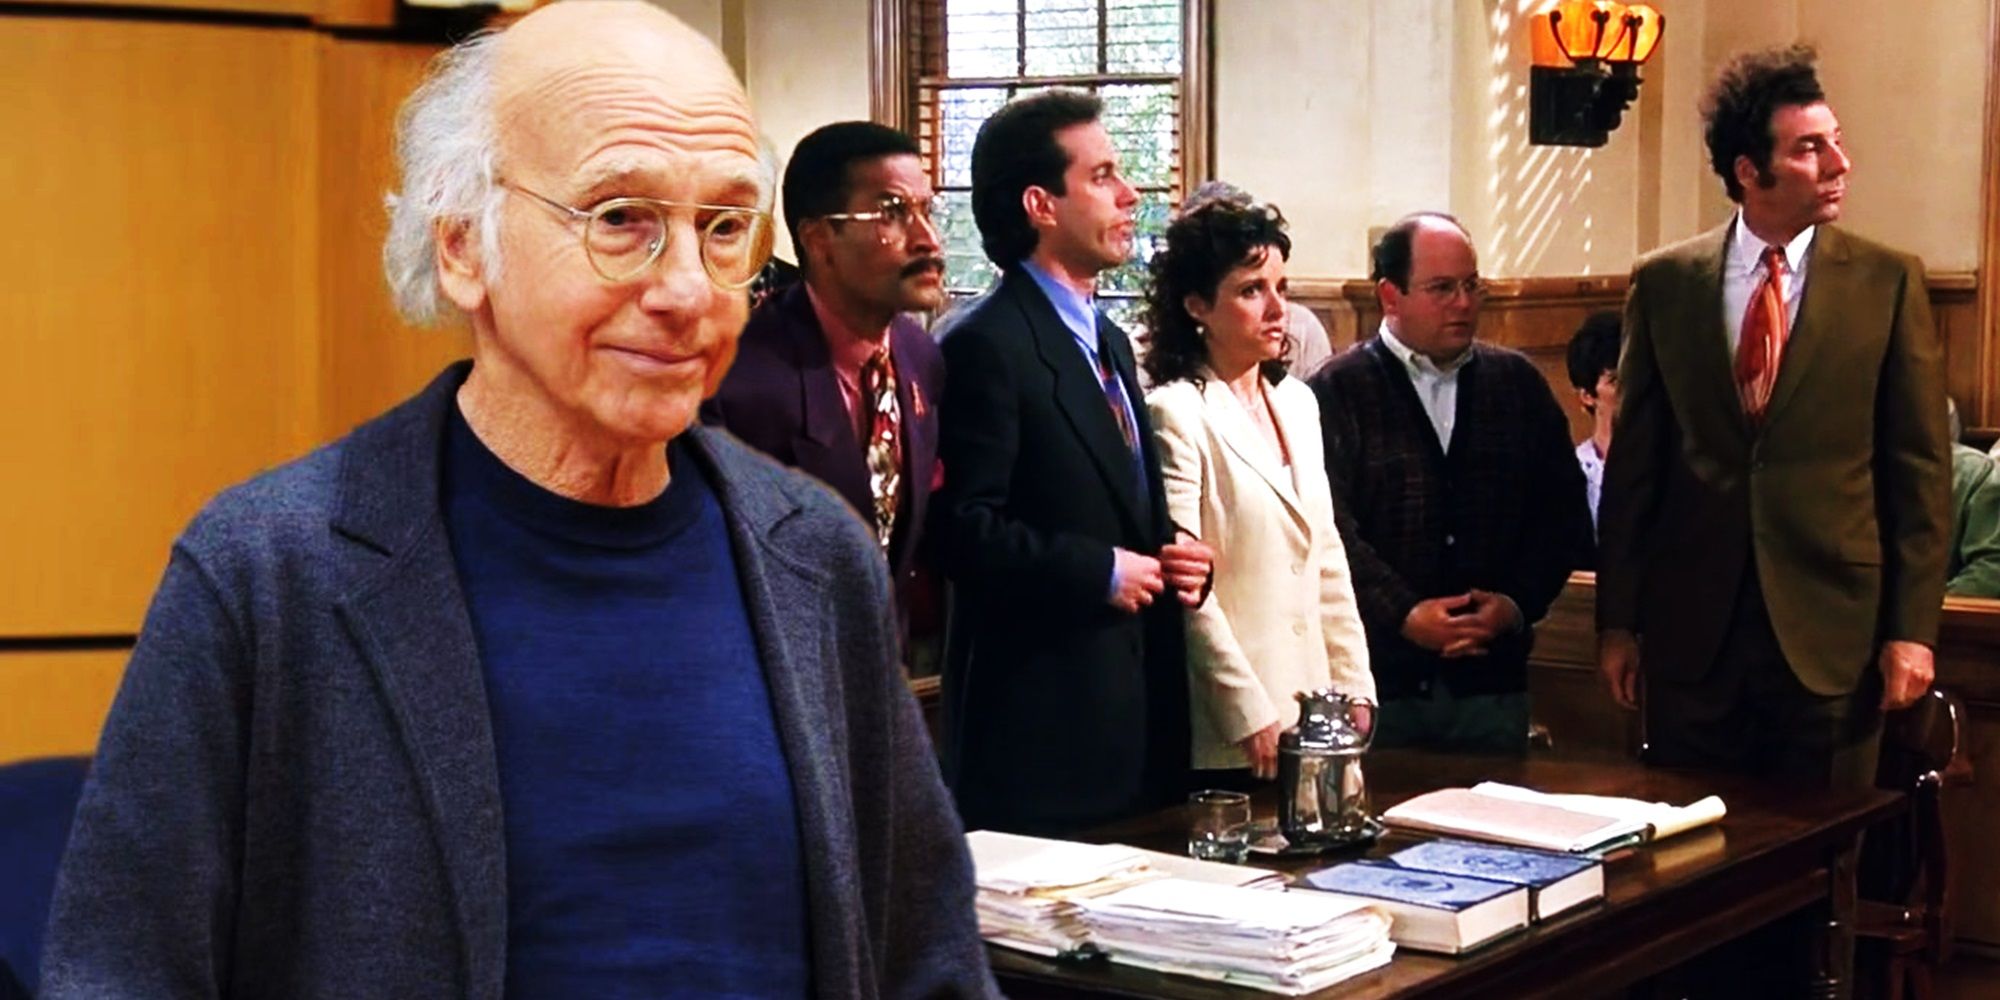 Collage of Larry in court in Curb Your Enthusiasm and Jerry, George, Elaine, and Kramer in court in Seinfeld